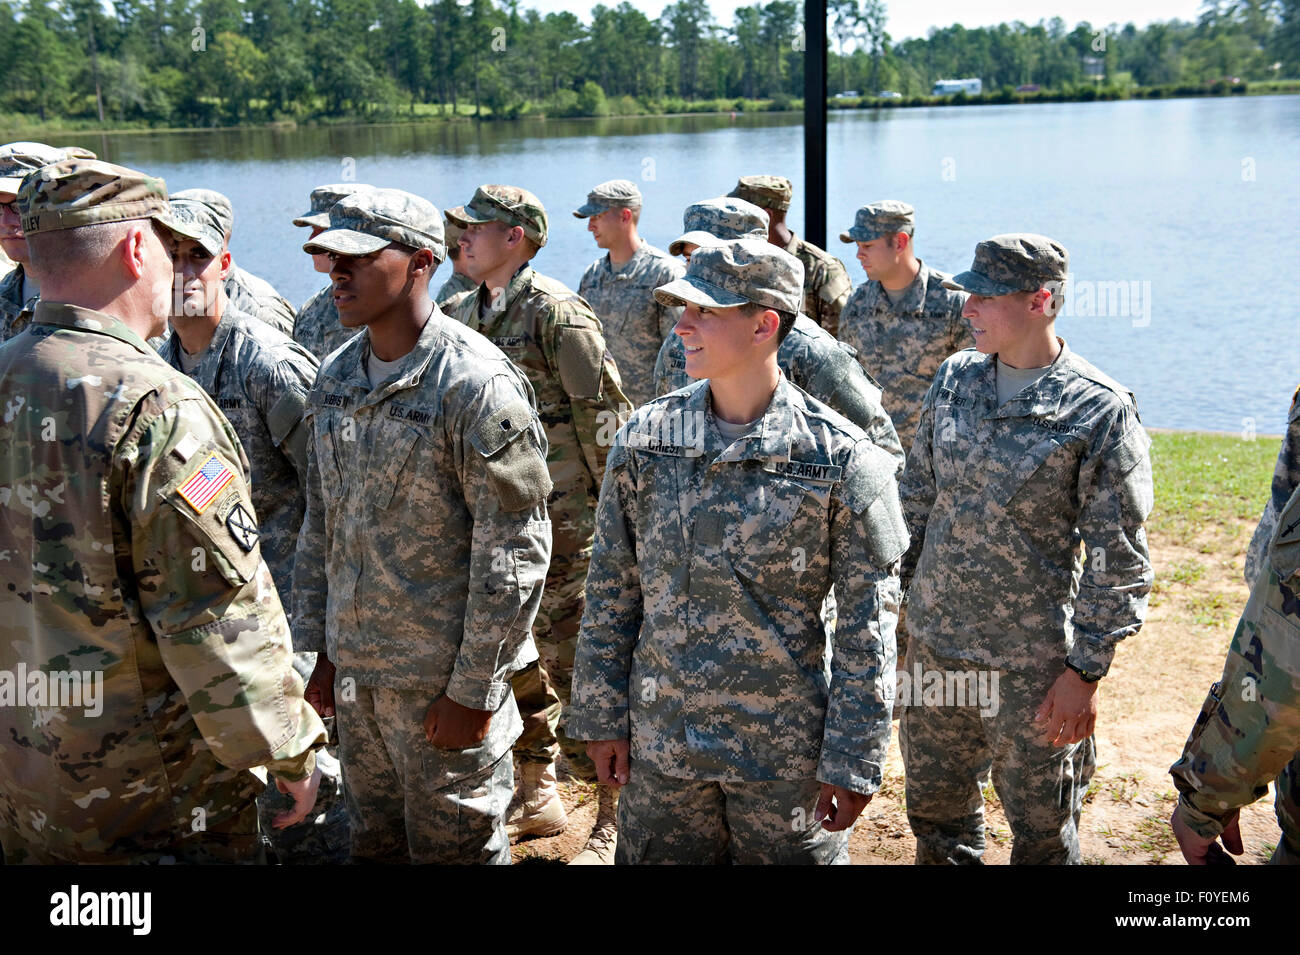 U.S. Army Chief of Staff Gen. Mark A. Milley speaks to soldiers during graduation ceremonies as Captain Kristen Griest looks on August 21, 2015 at Fort Benning, Georgia. Griest and fellow soldier 1st Lt. Shaye Haver became the first women to graduate from the 61-day-long Ranger course considered one of the most intense and demanding in the military. Stock Photo